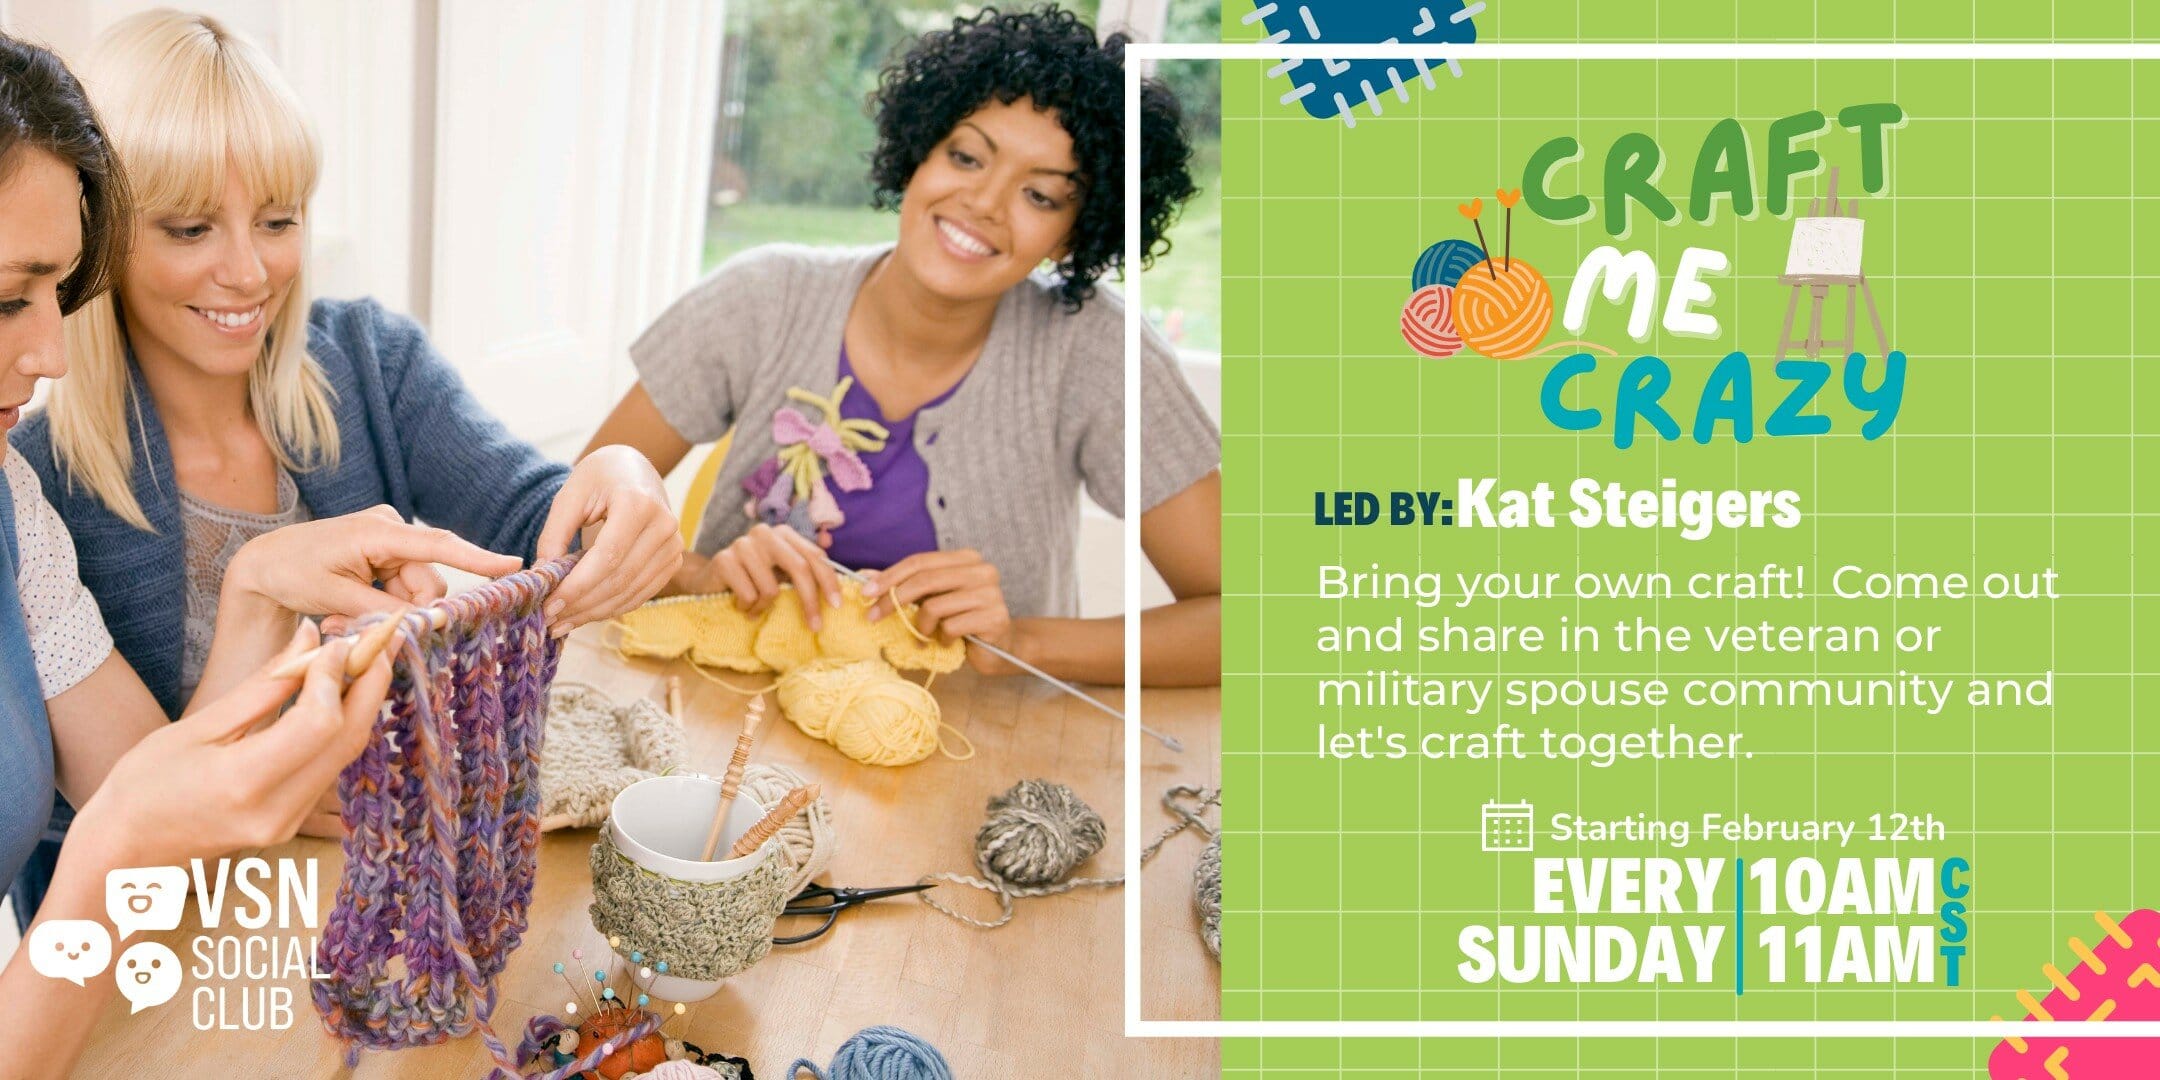 Craft Me Crazy on every Sunday starting Feb 12 at 10AM CST